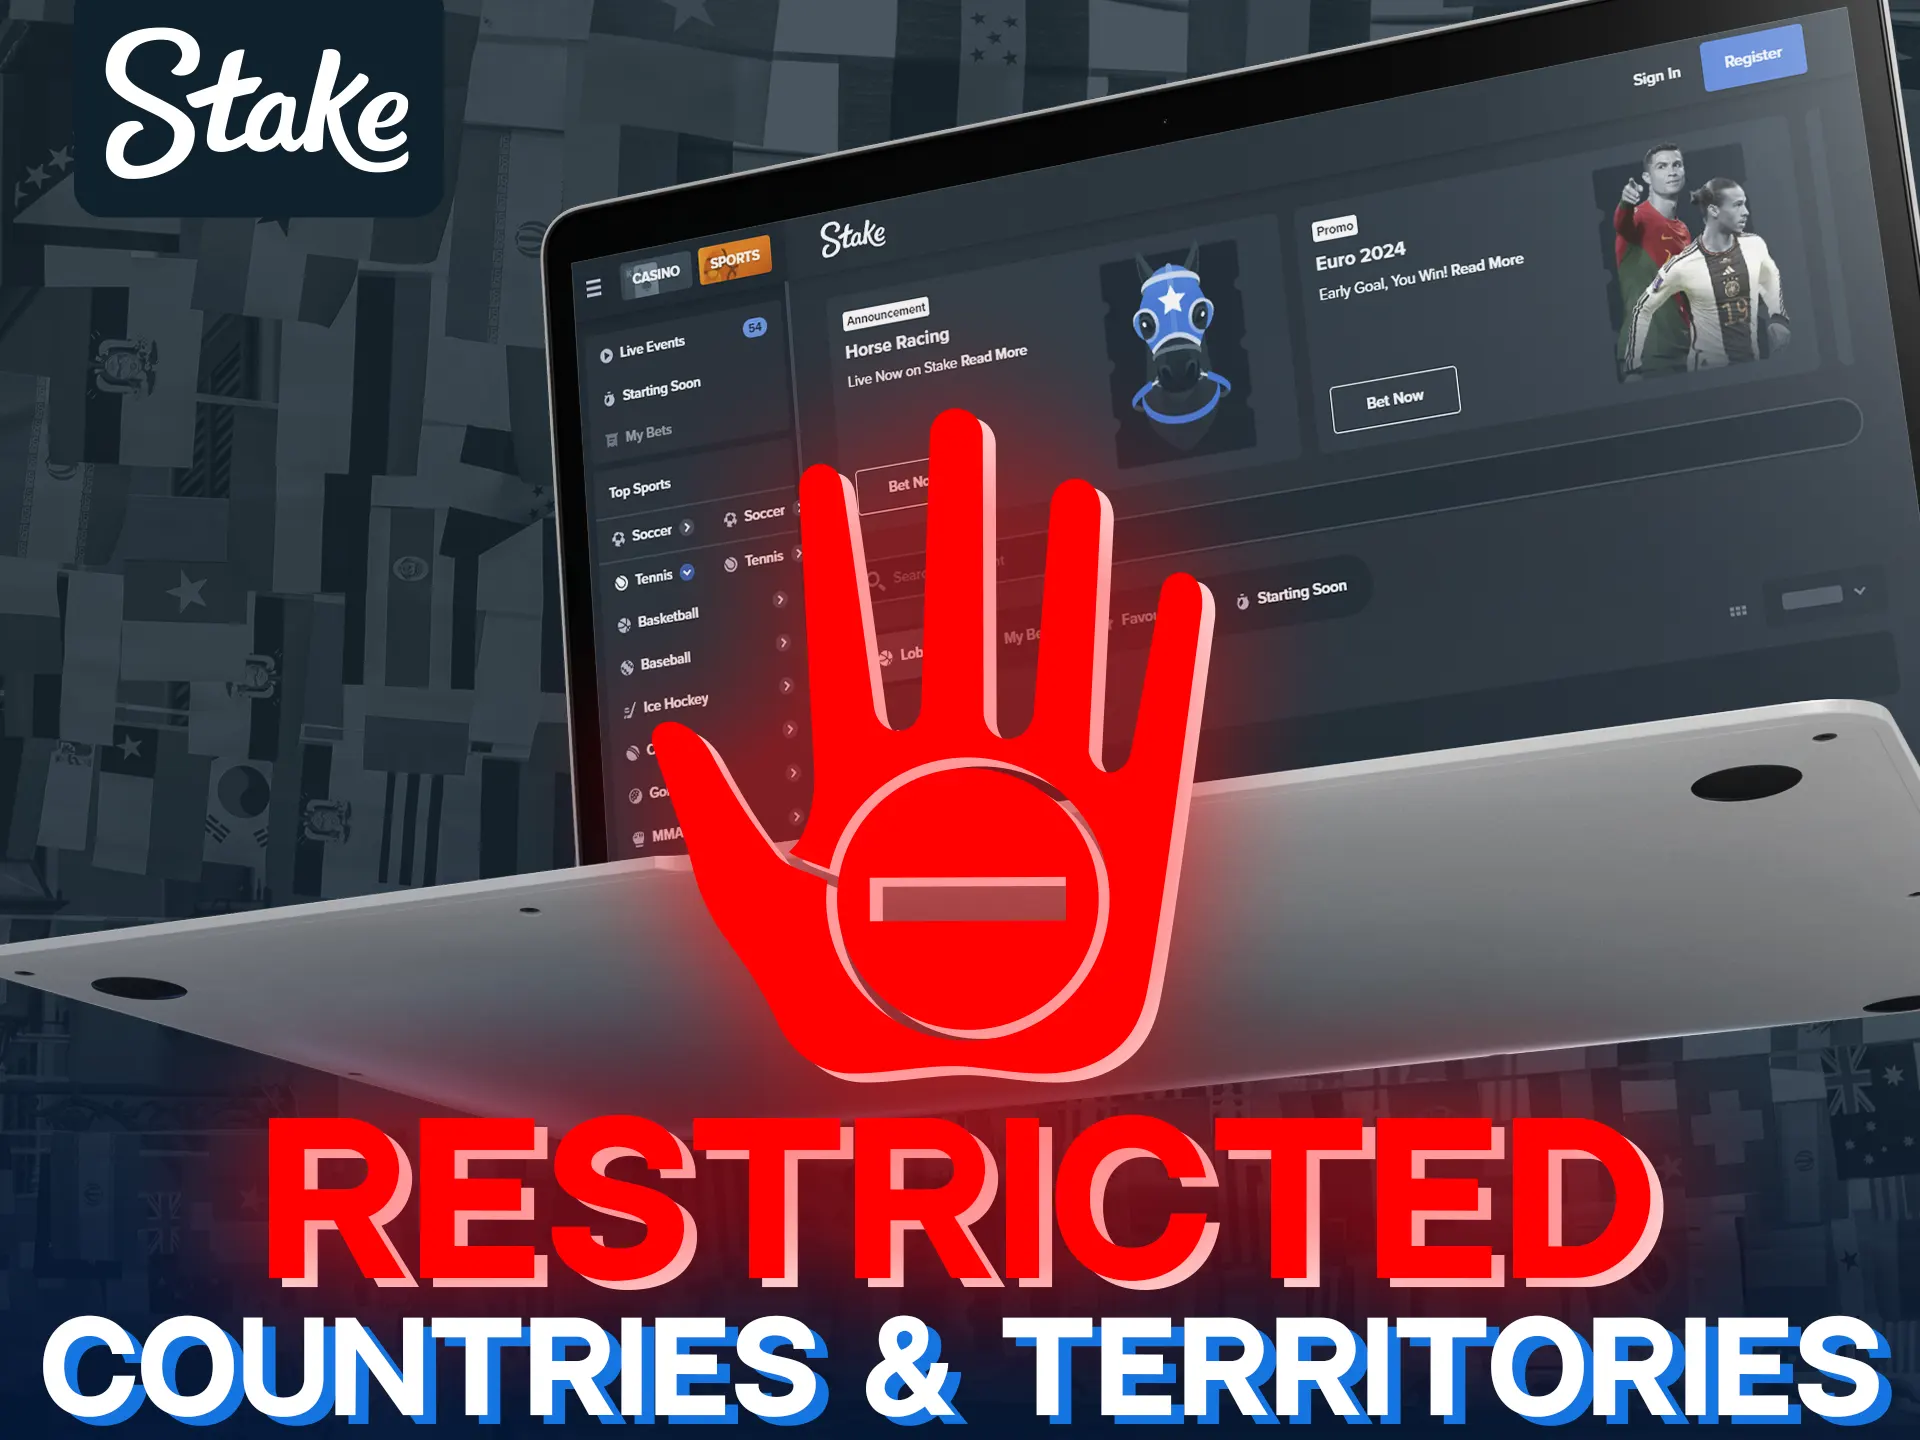 Stake is restricted in several countries including the US.